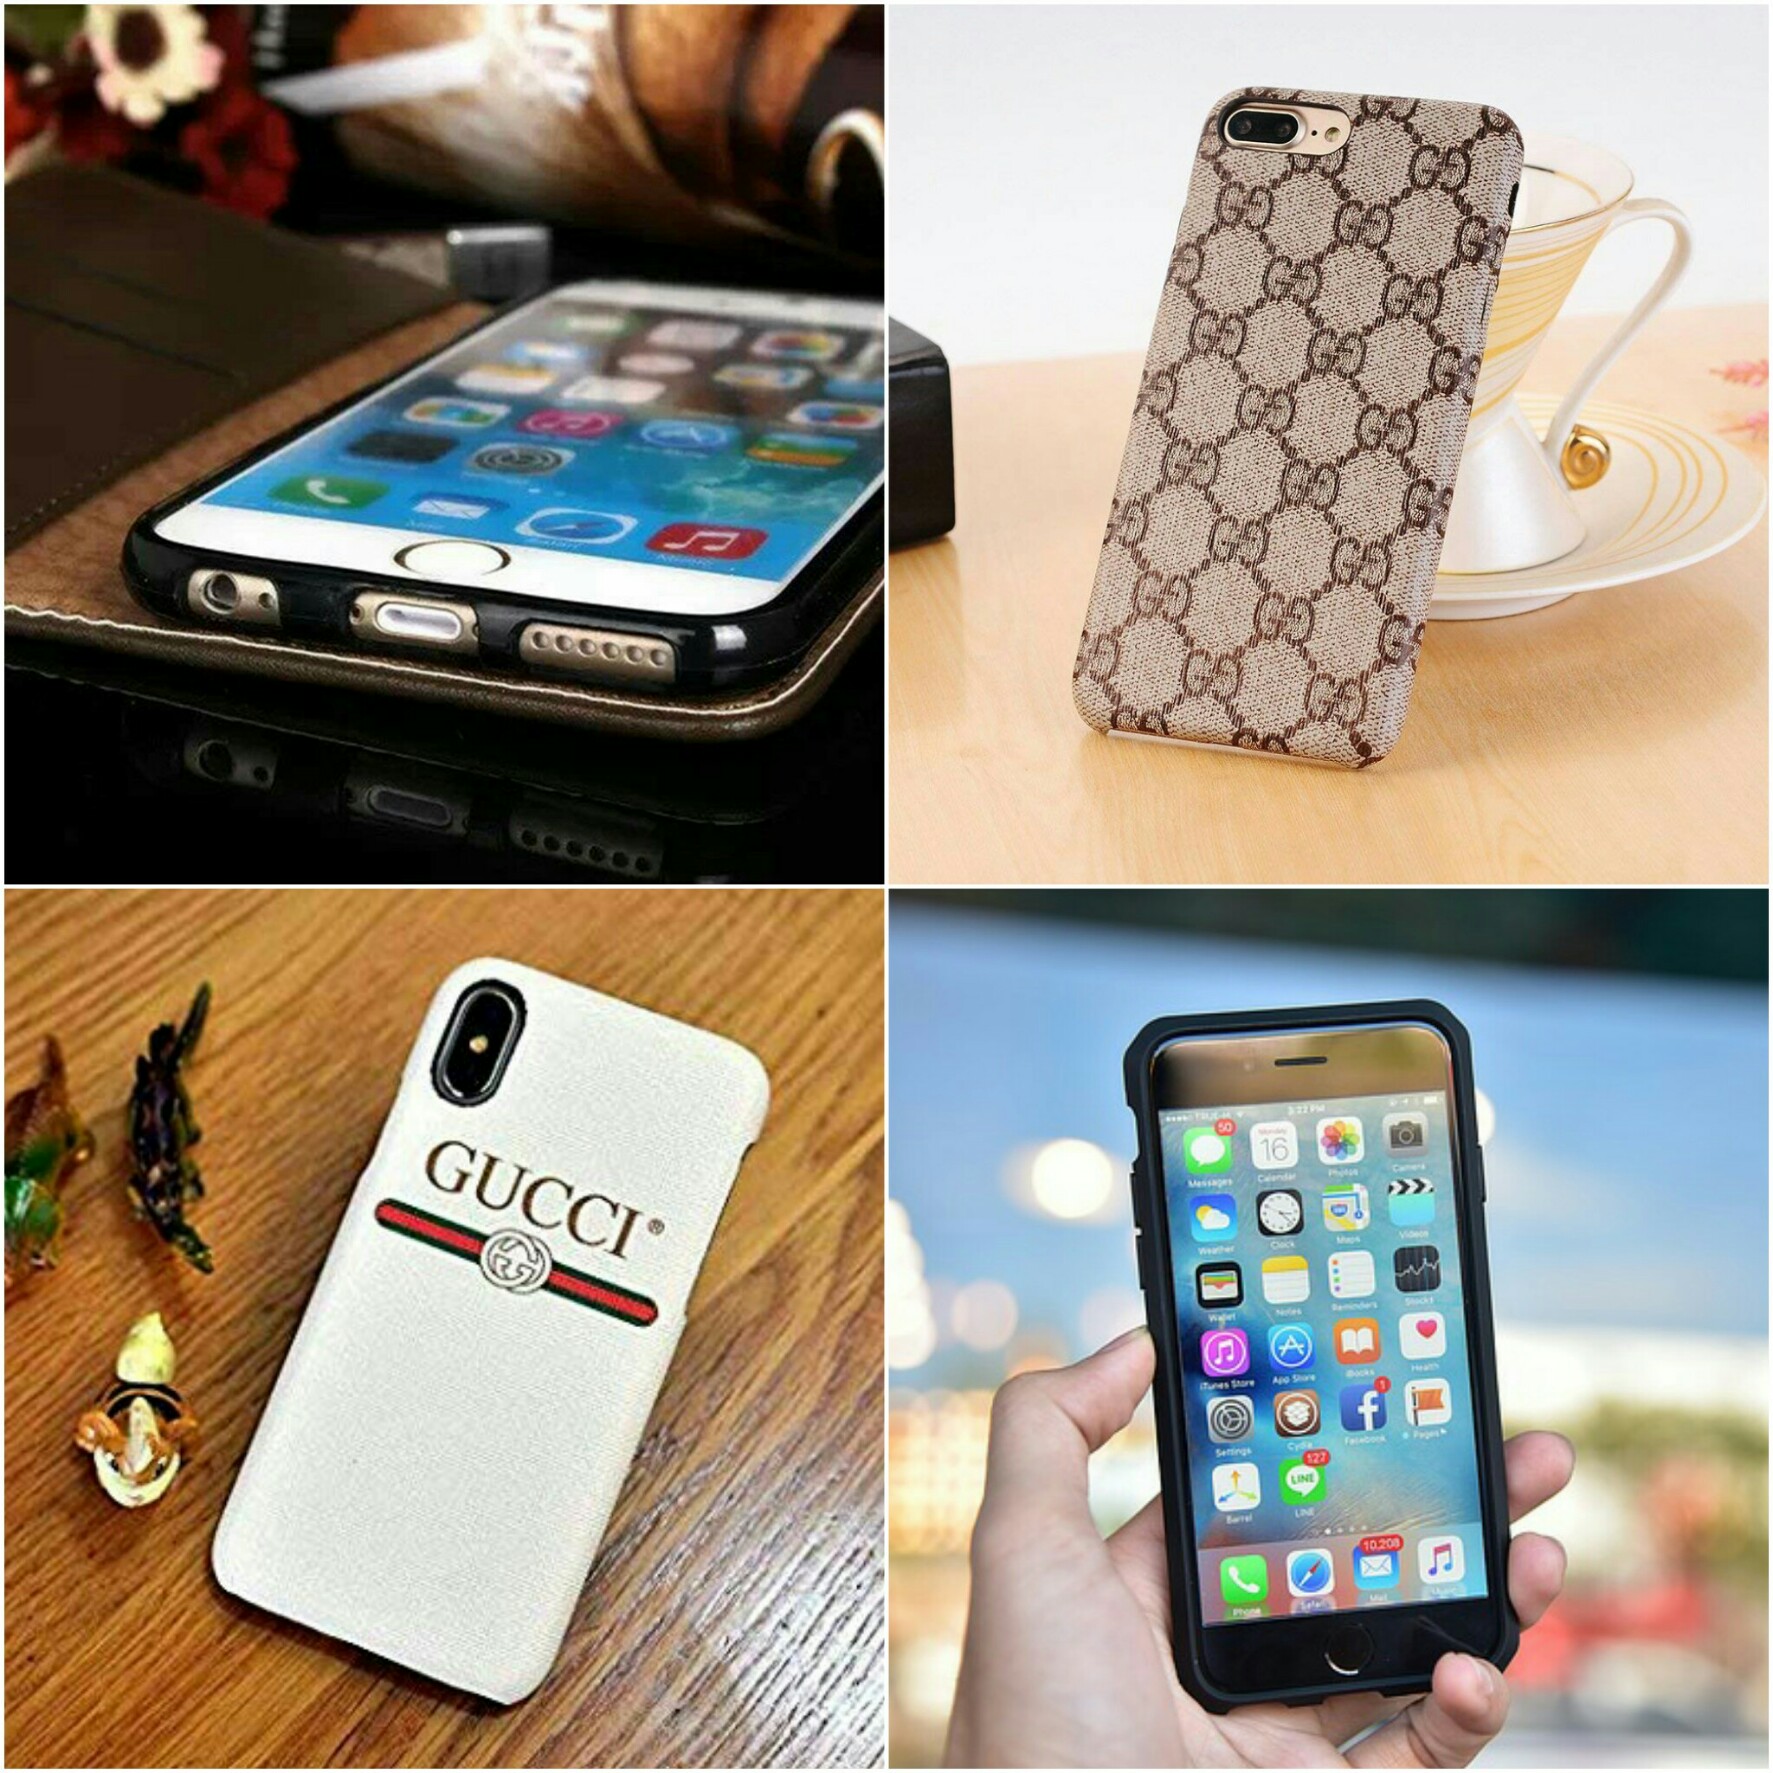 Best Gucci Phone Cases For iPhones (iPhone 7, 8 Plus and X) at Affordable Prices